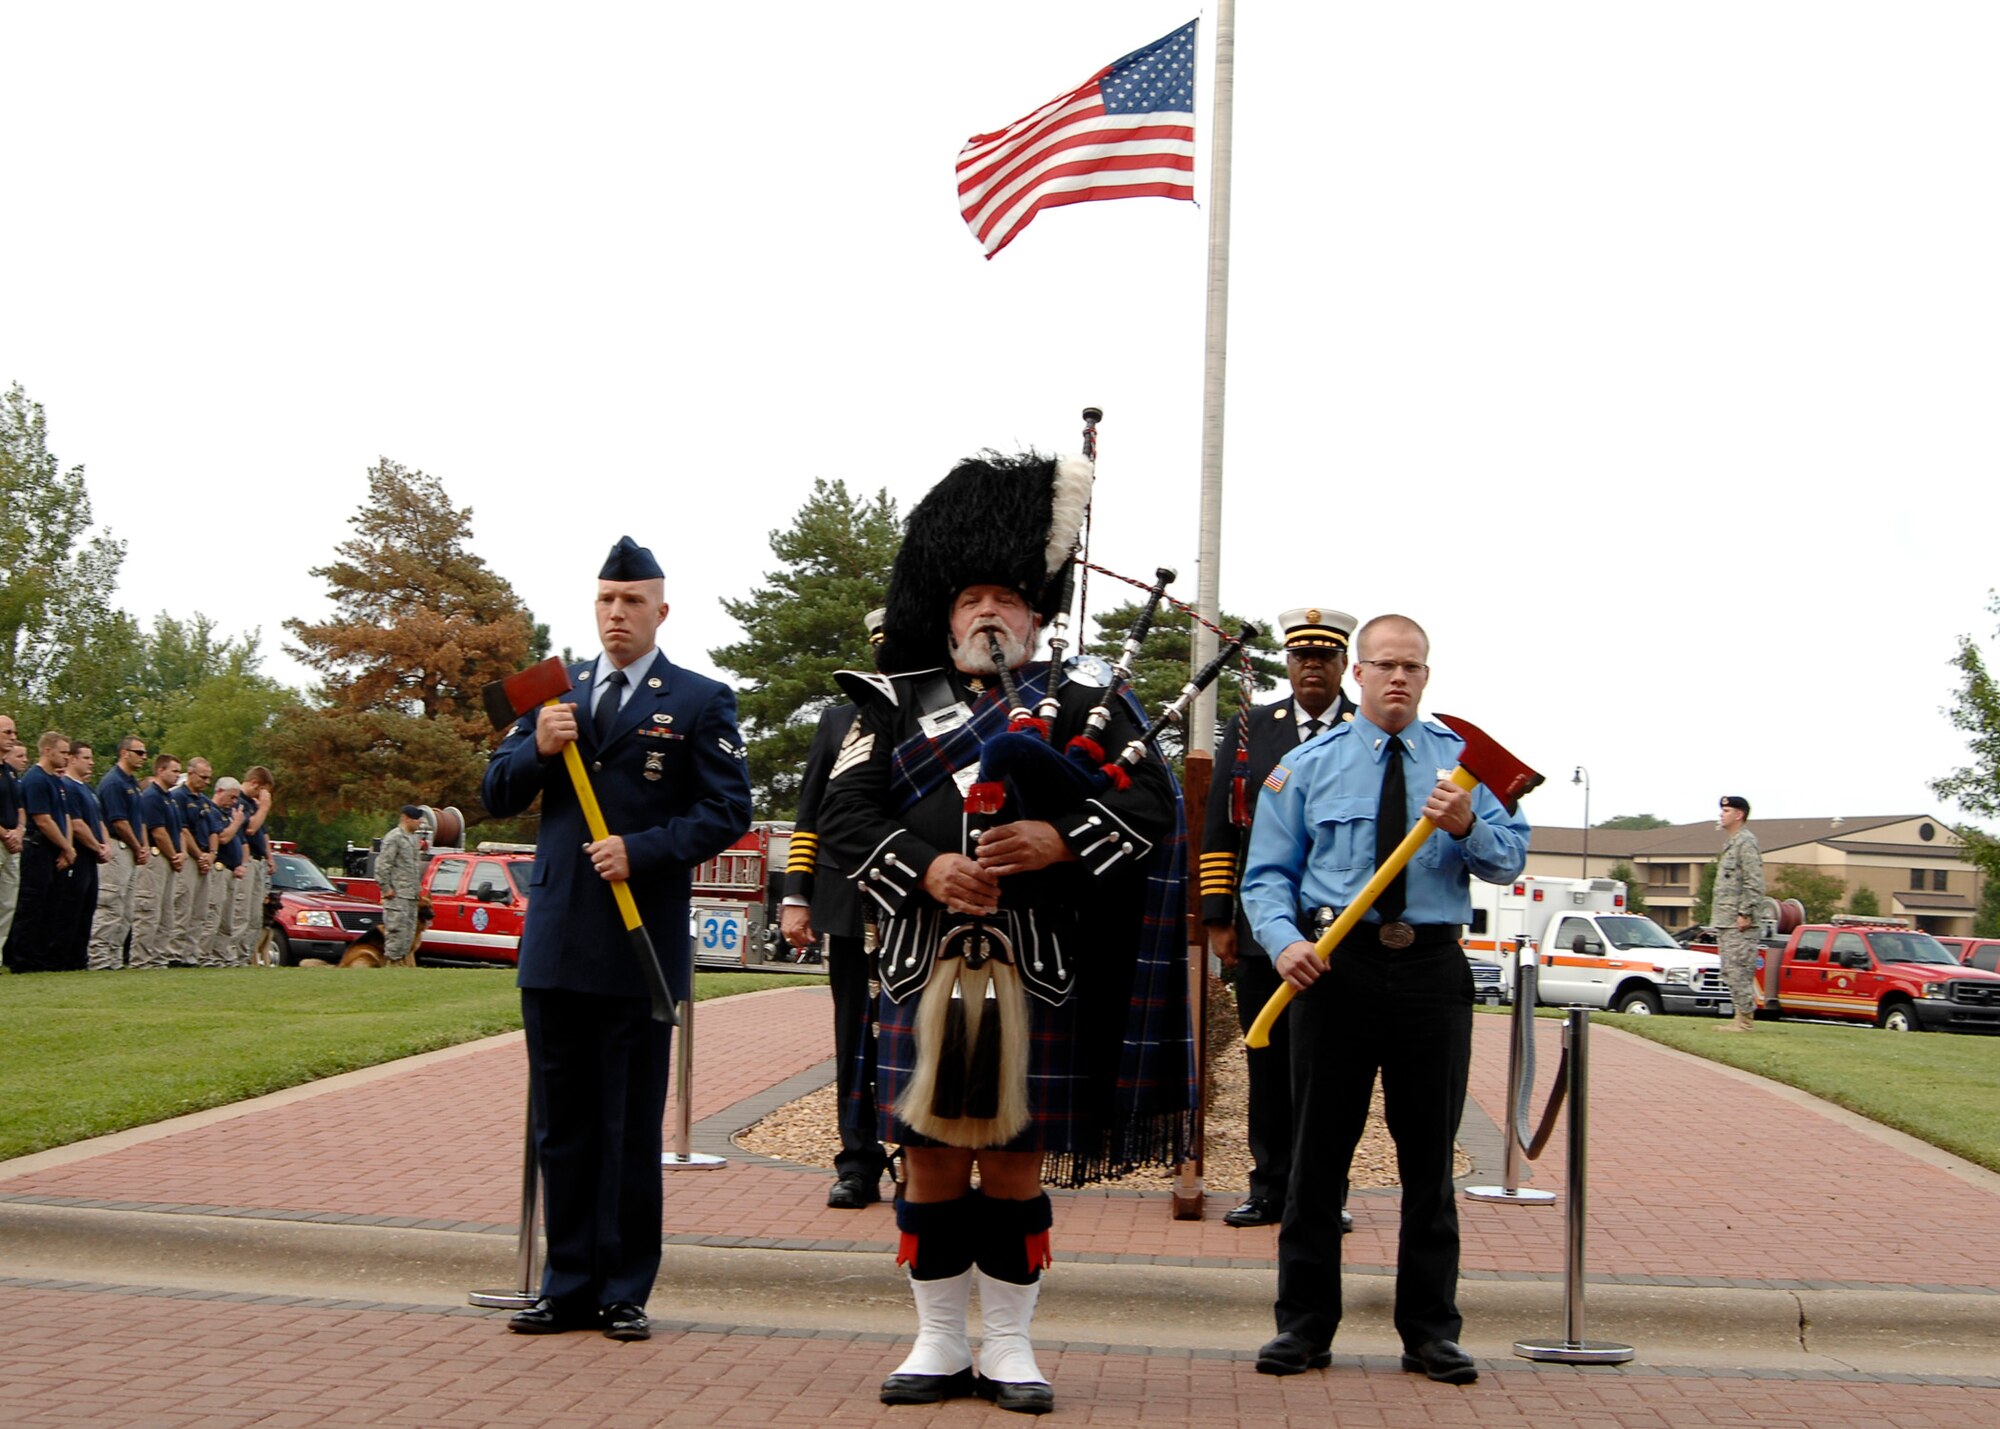 Airman 1st Class Matthew Keenan and Mr. Christopher Muriset (on right) firefighters from the 22nd Civil Engineer Squadron, flank William McCollum, Caledonian Pipes and Drums bagpiper, while he plays “Amazing Grace,” at a Patriot Day retreat ceremony, Sept. 11, 2009, at McConnell Air Force Base, Kan. (U.S. Air Force photo/Senior Airman Anthony Mejia)